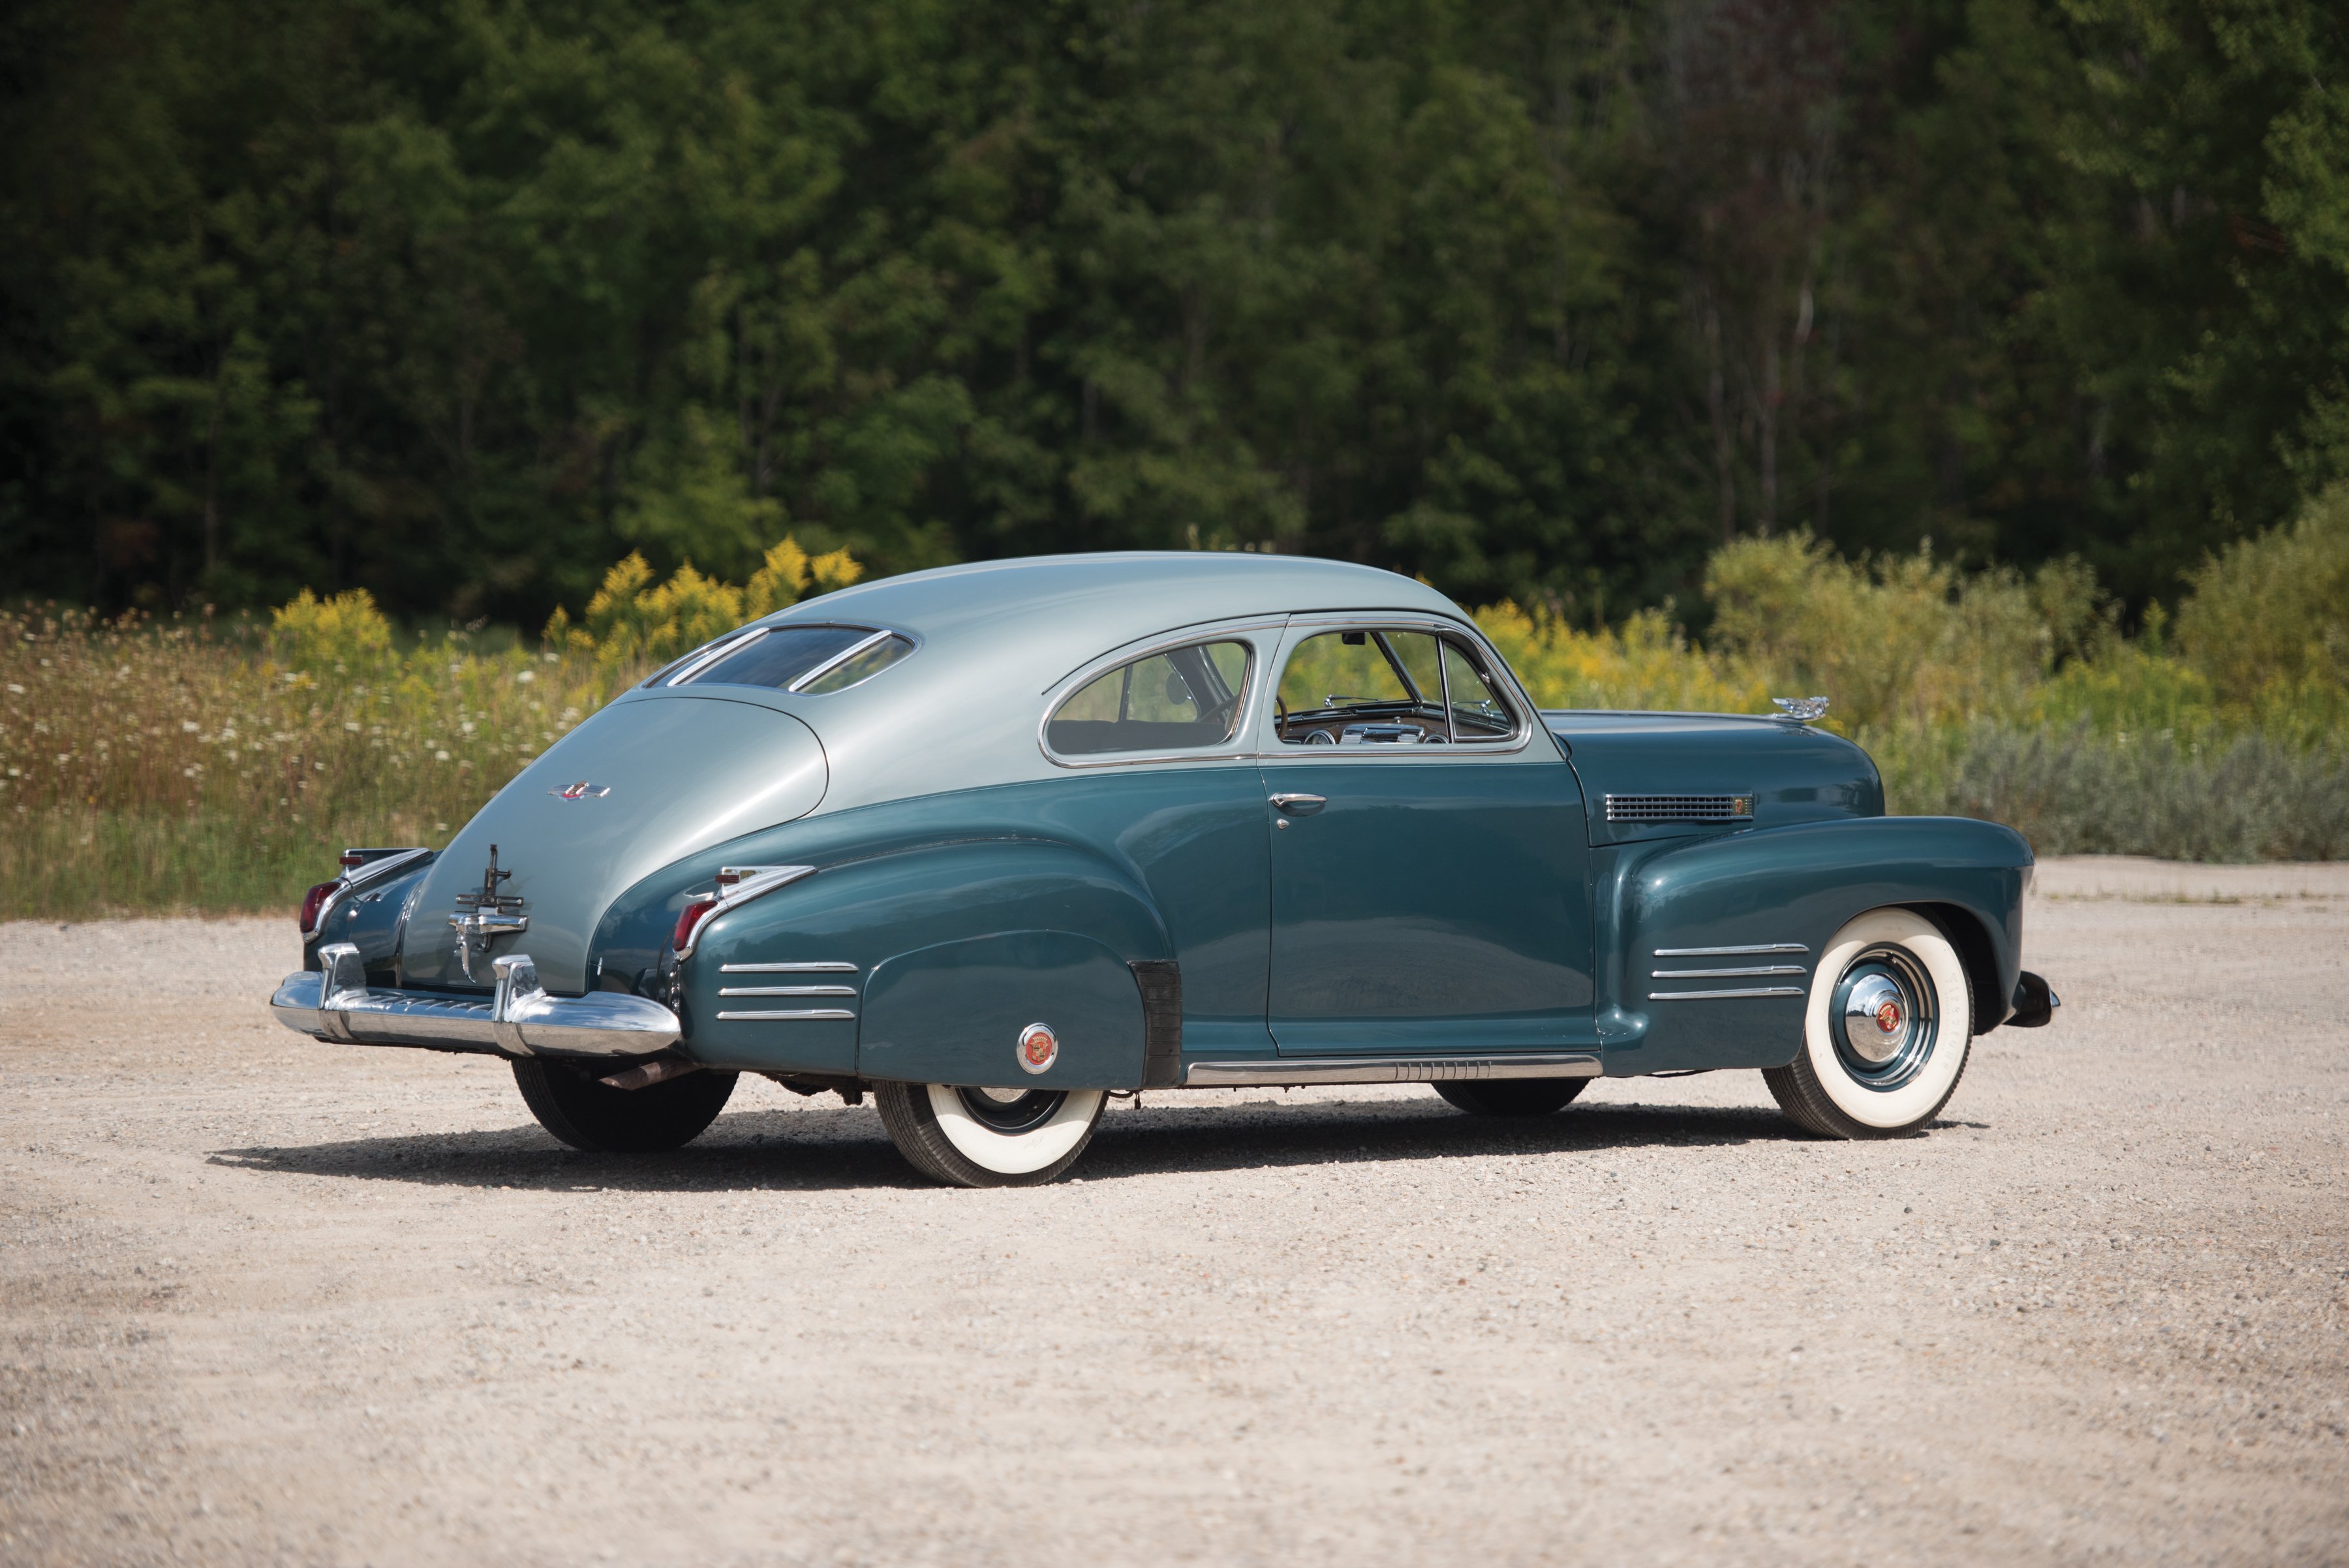 1941, Cadillac, Sixty one, Coupe, Deluxe, 6127d, Luxury, Retro Wallpaper